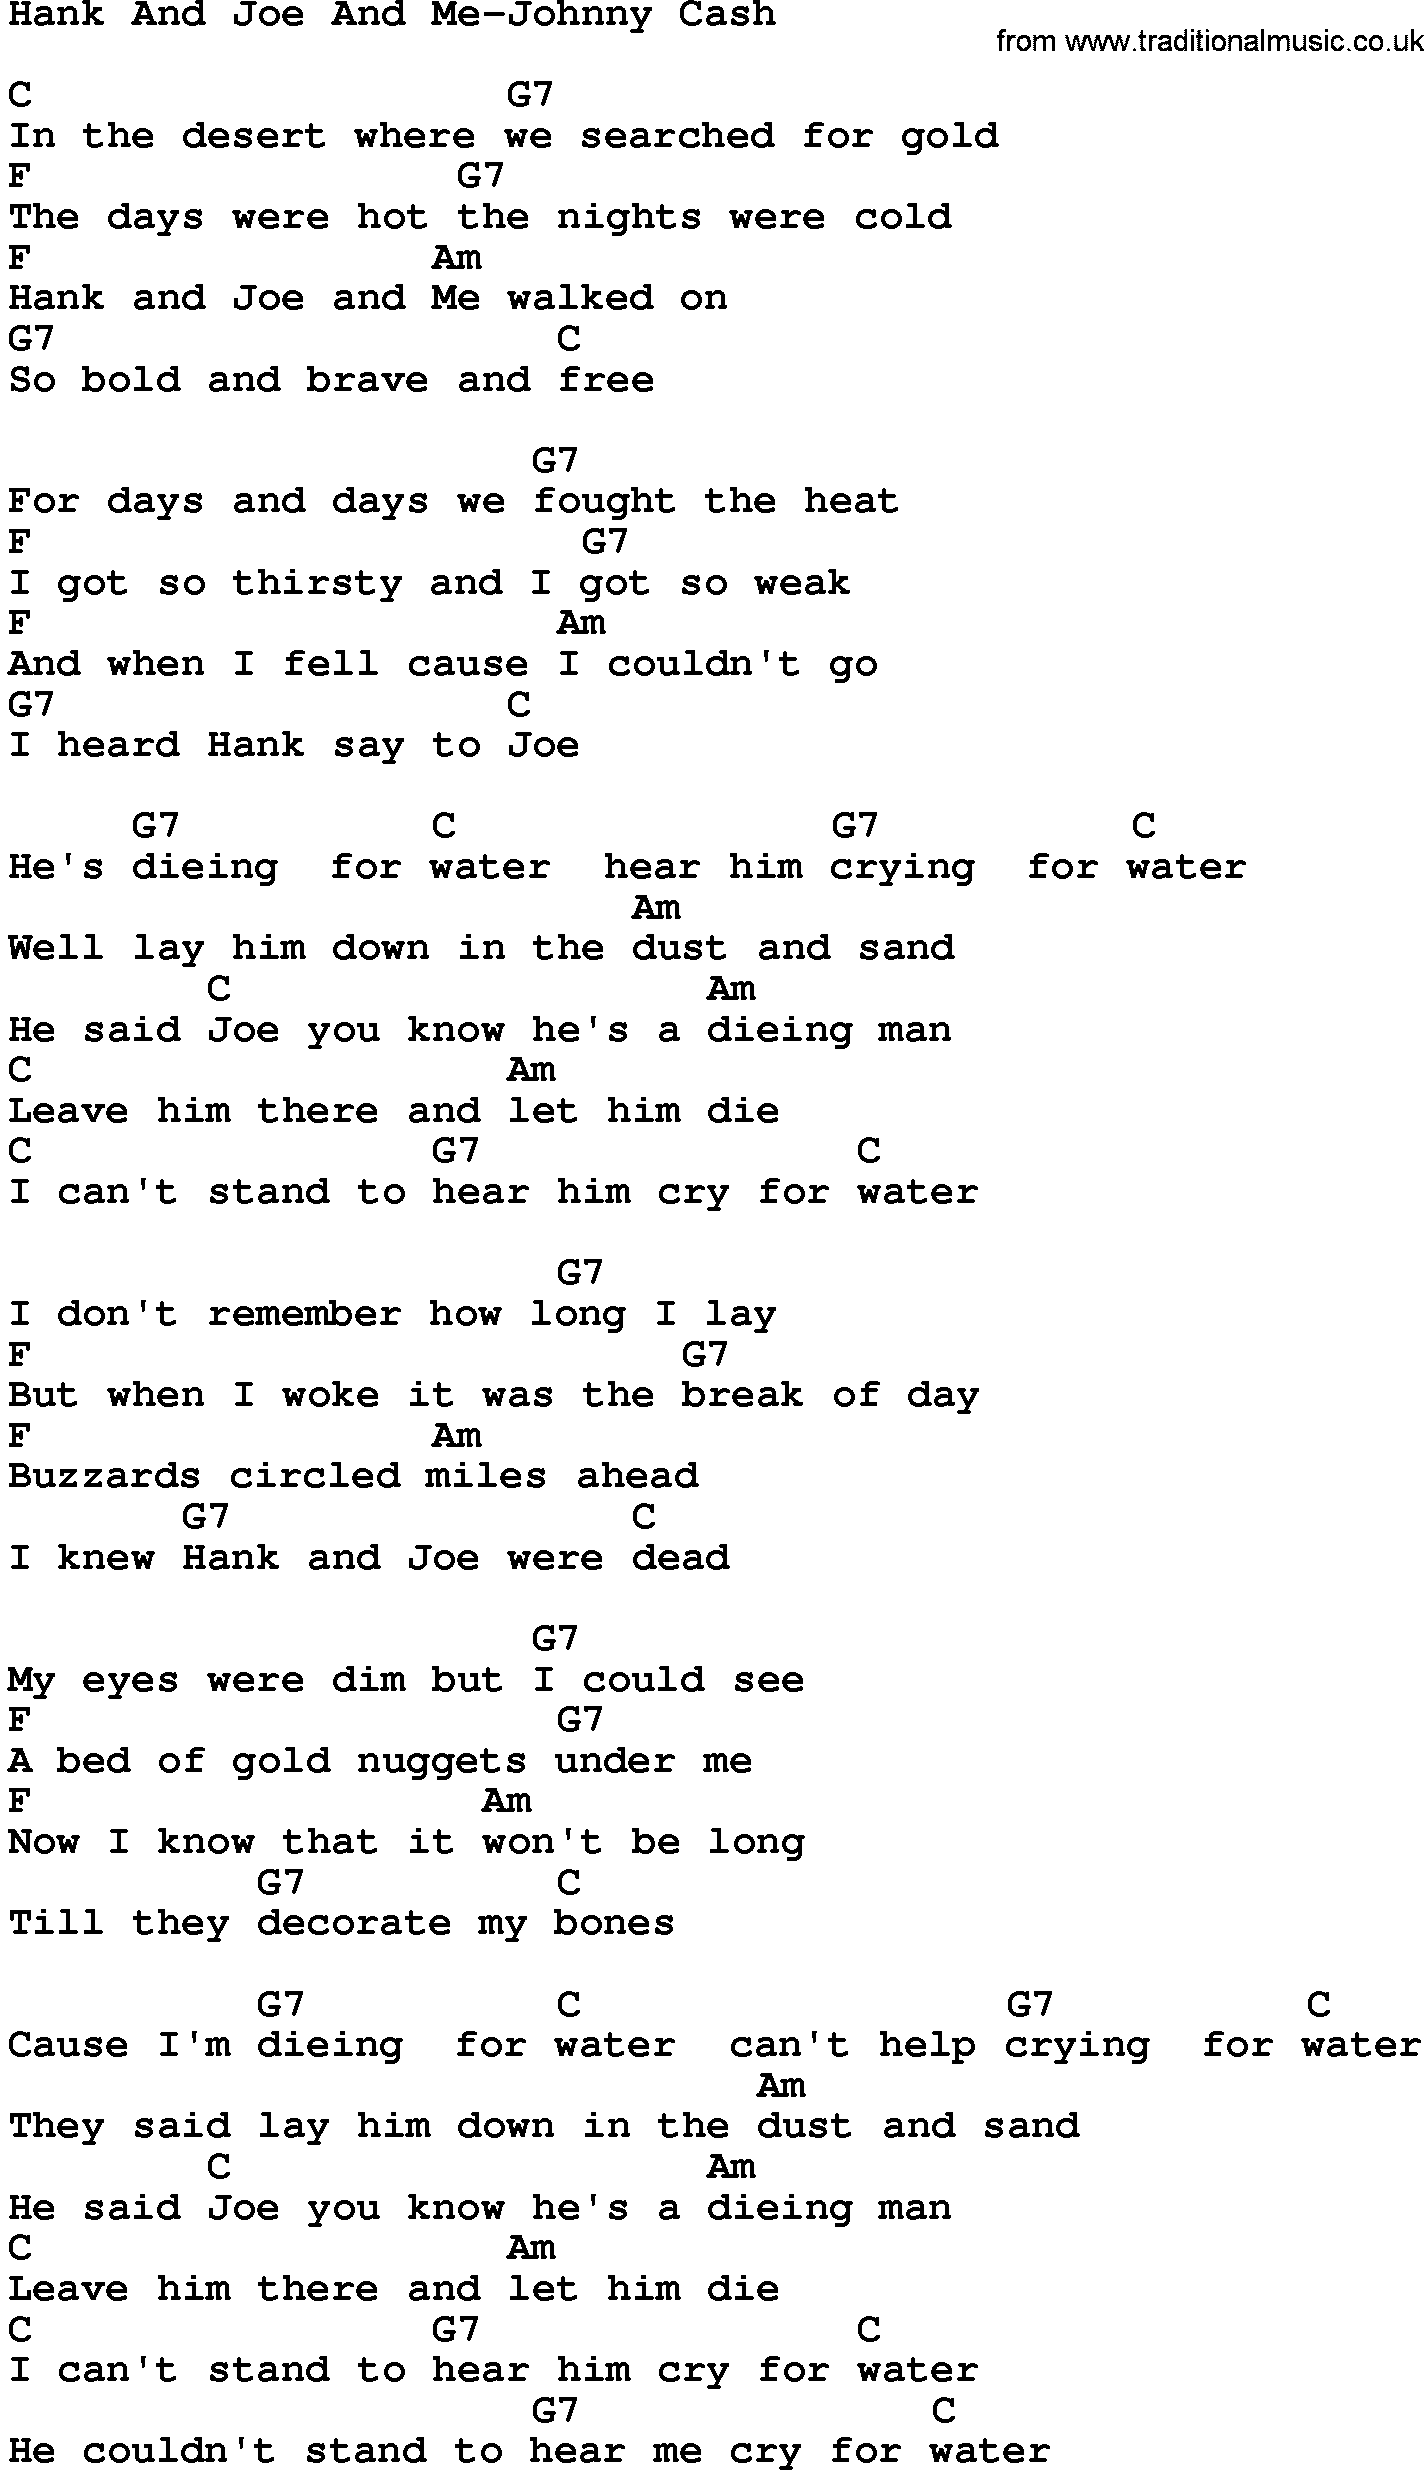 Country music song: Hank And Joe And Me-Johnny Cash lyrics and chords